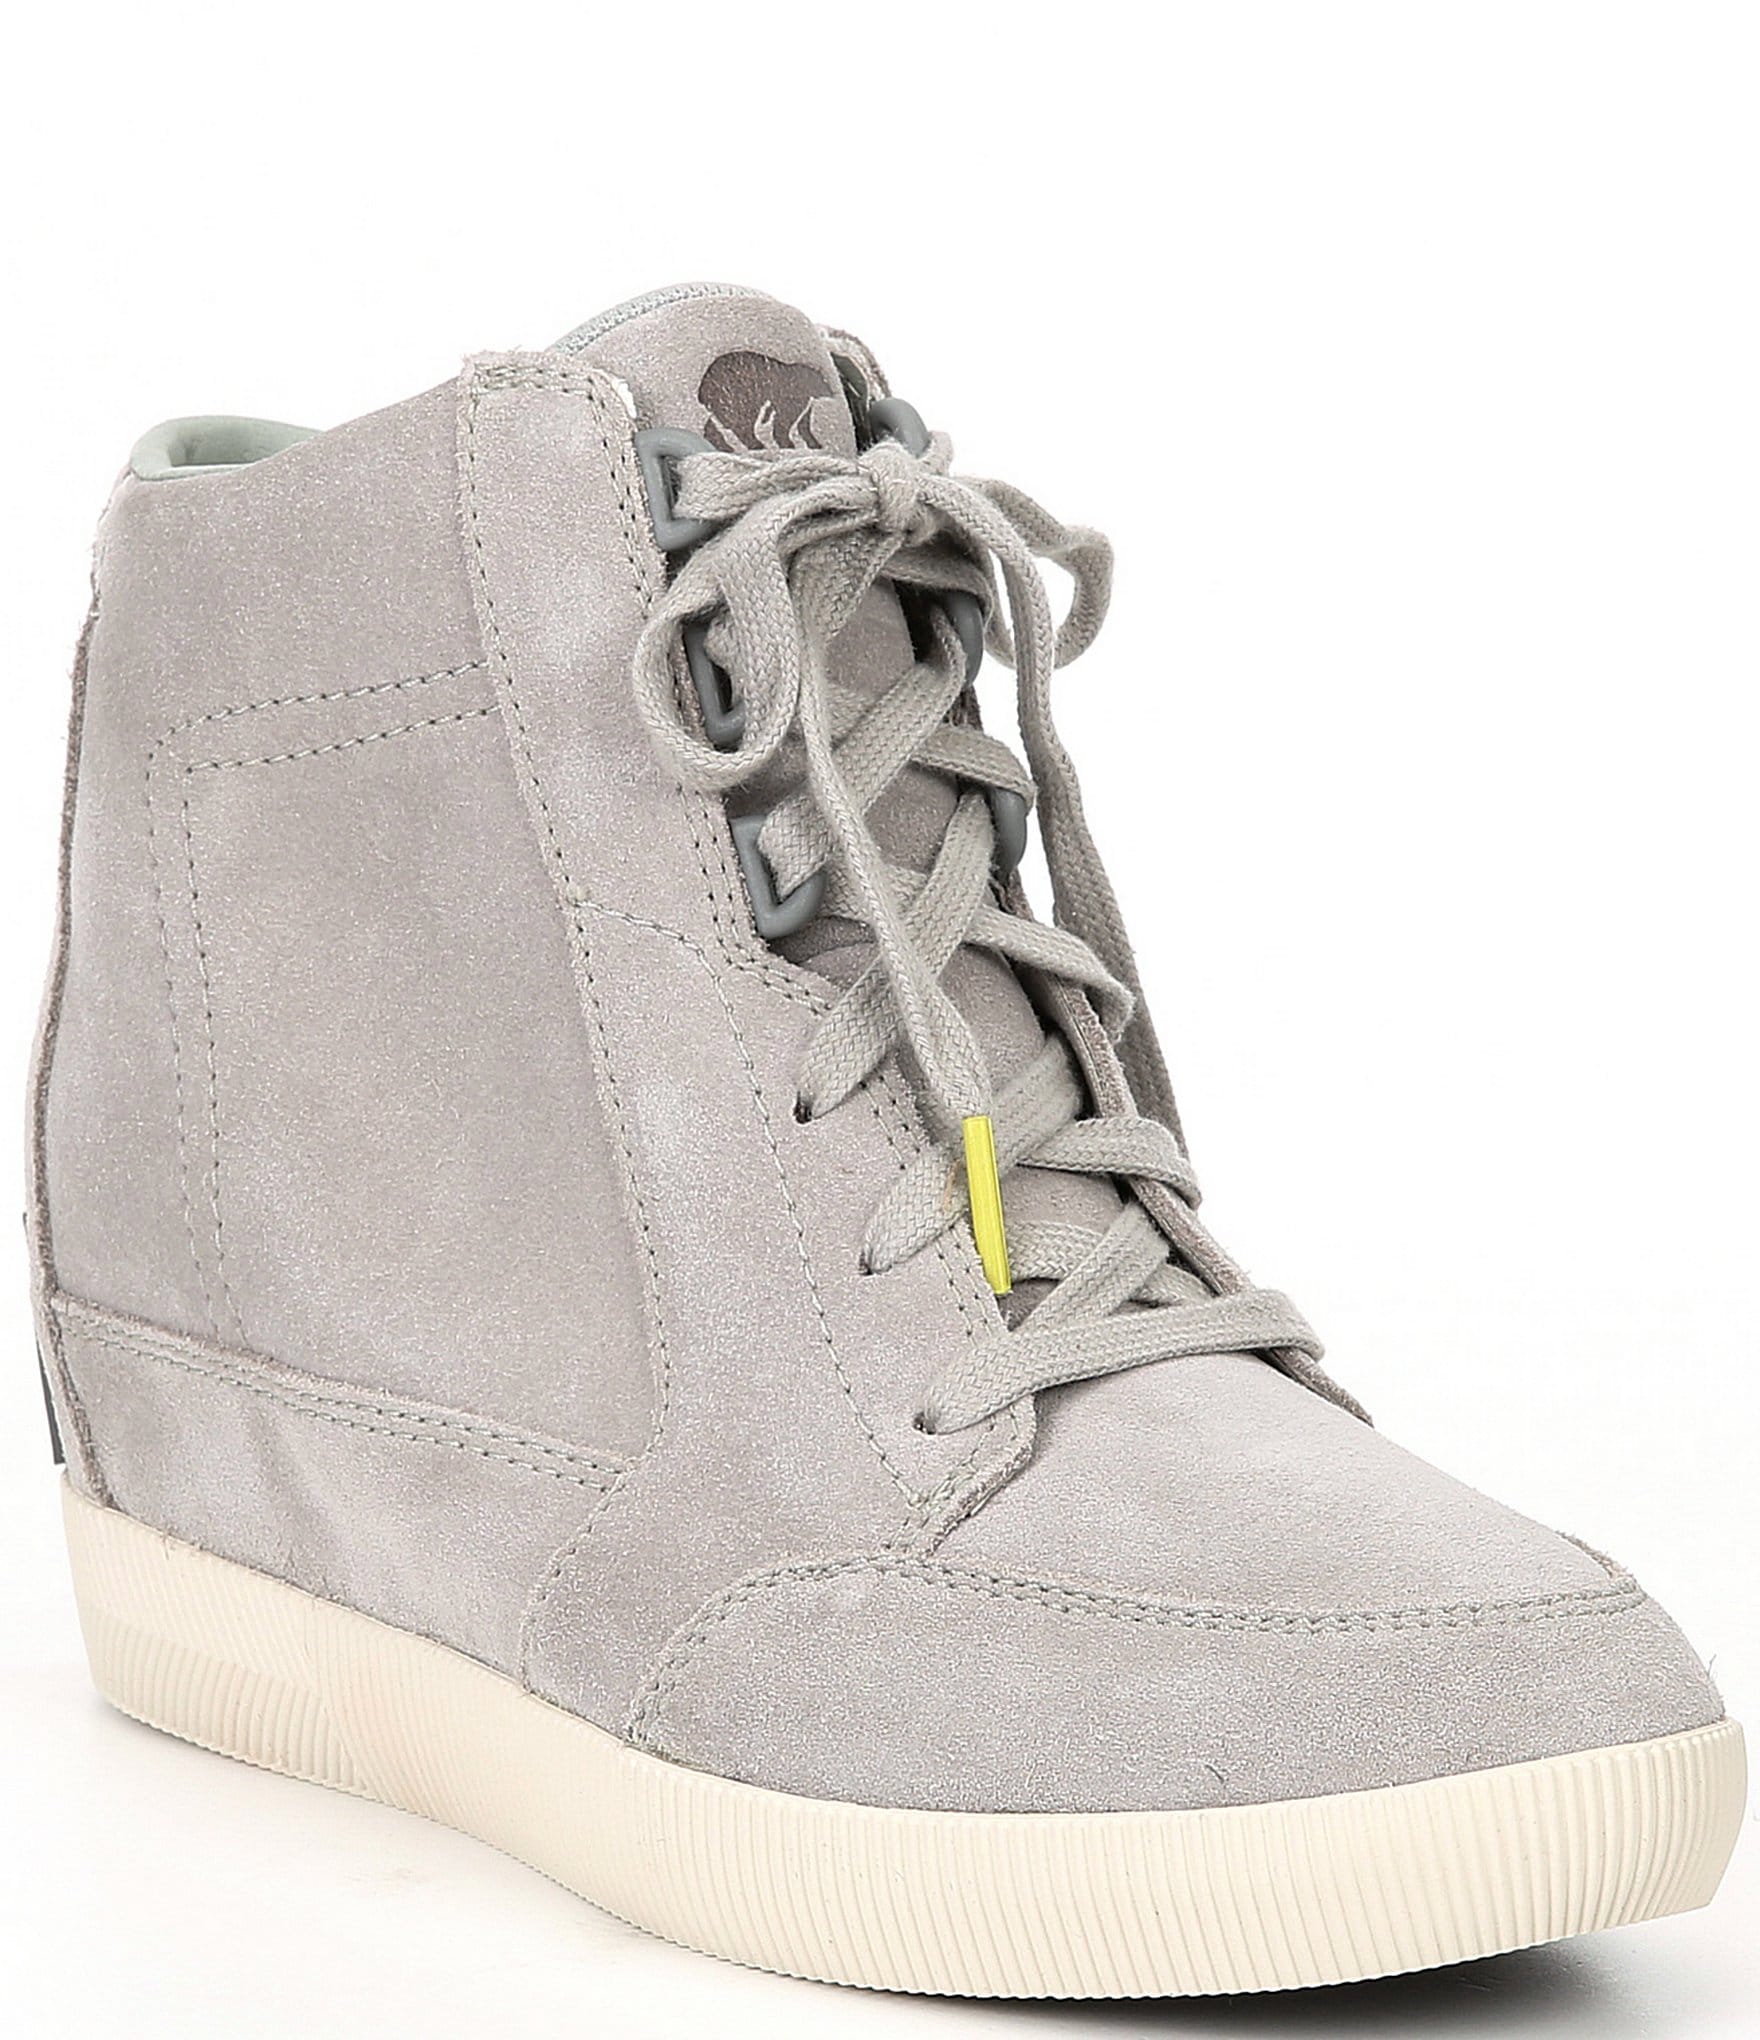 Buy Wedge Sneakers Online In India At Best Price Offers | Tata CLiQ